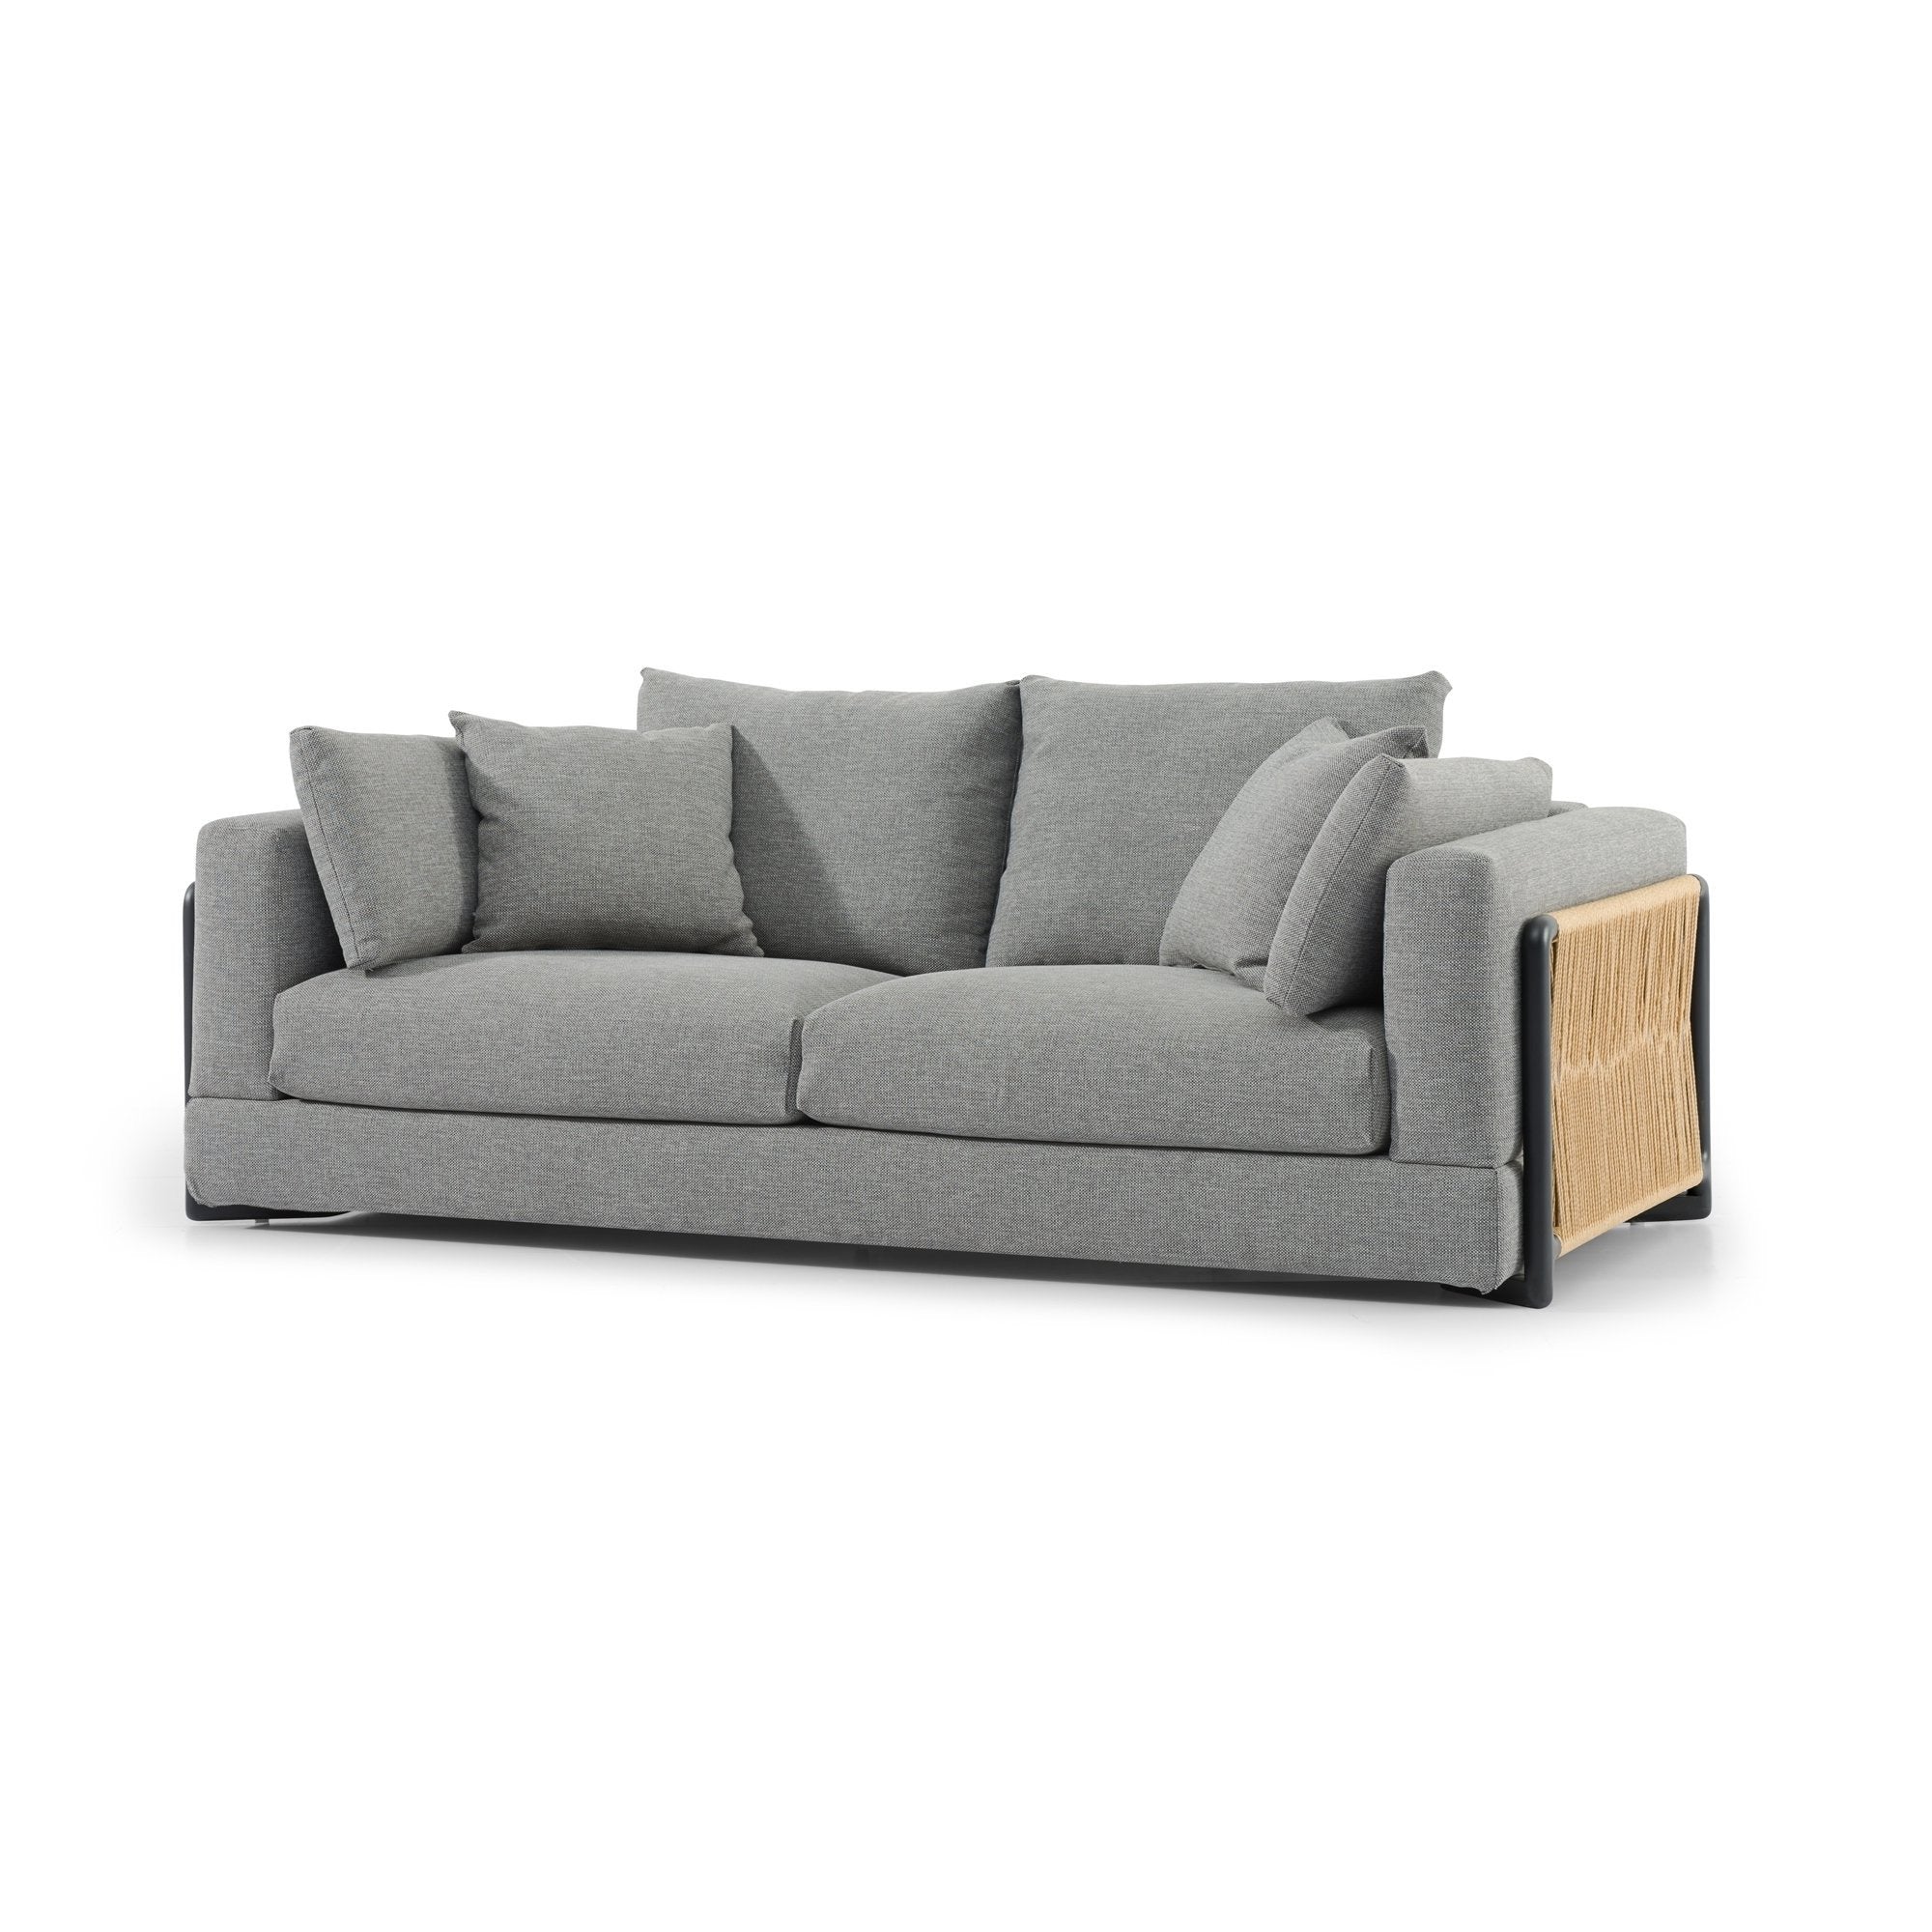 Ava 3 Seater Sofa with 2 Rubber Wood Armrest - GraphiteGrey